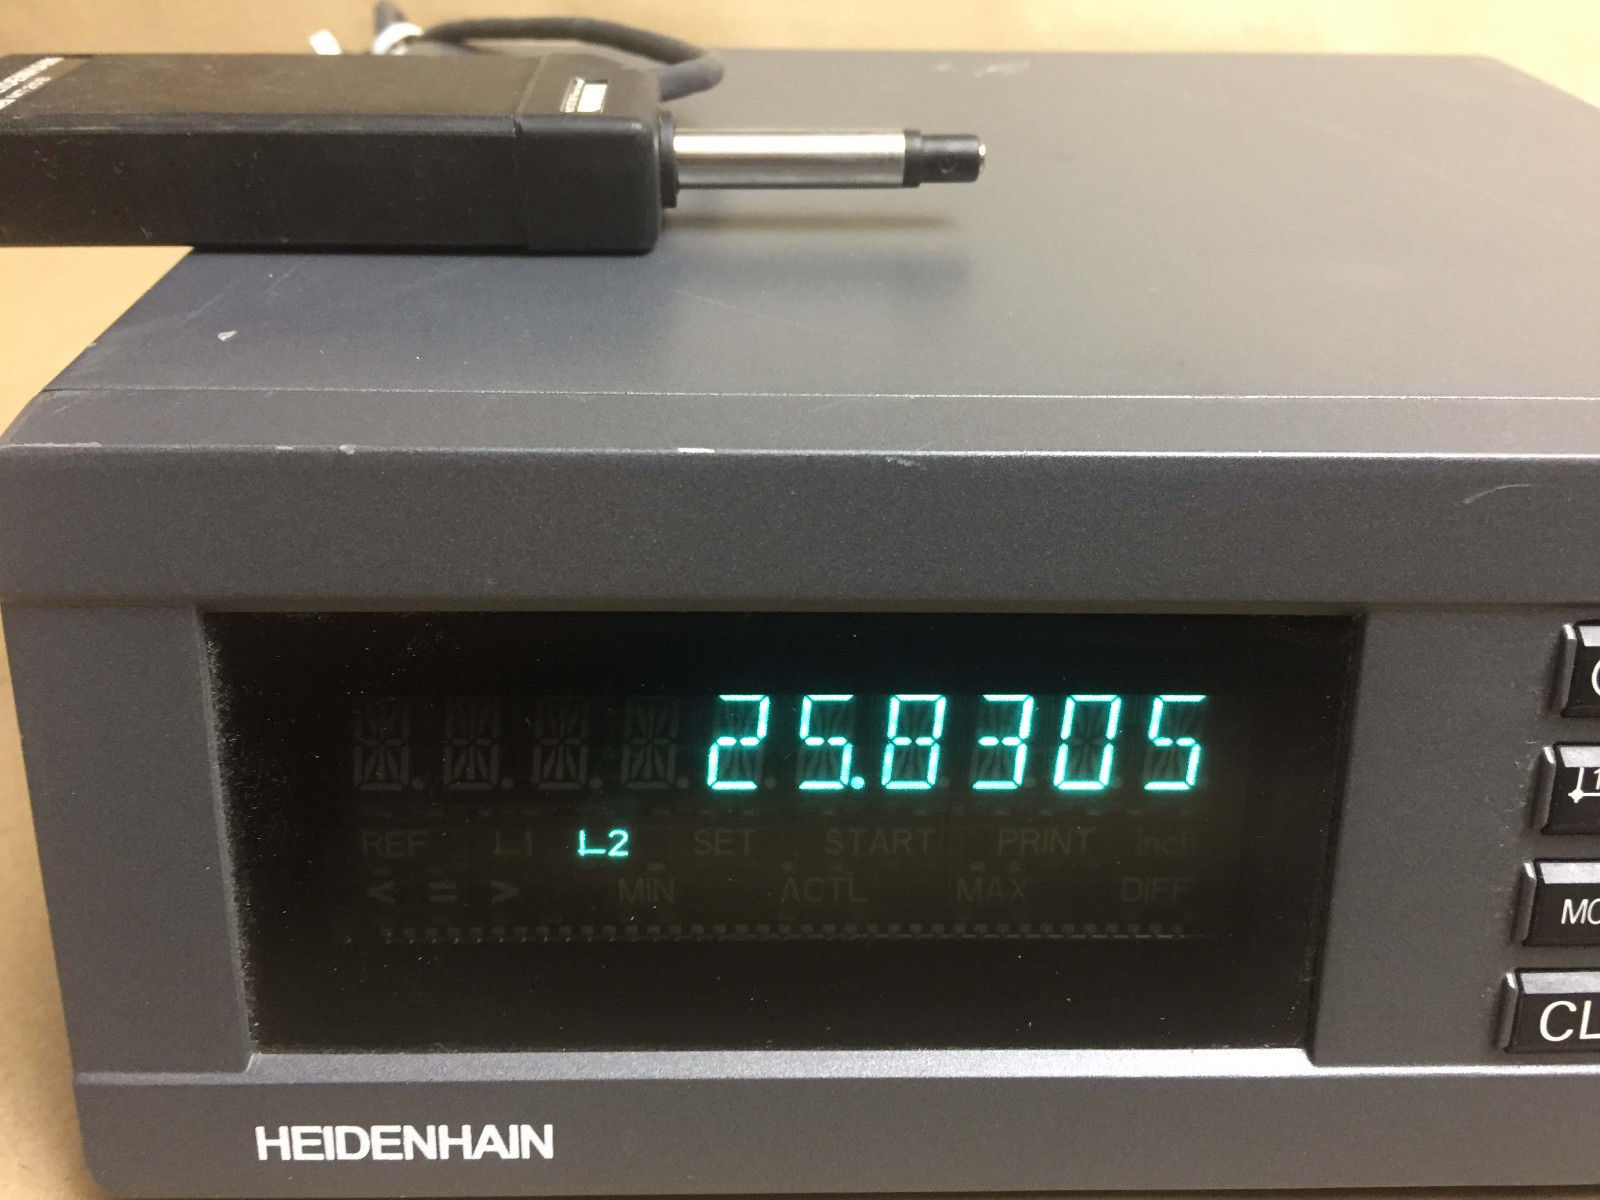 Heidenhain MT25 linear scale gauge 1" 25mm DRO Digital Reaout (probe only) DIAGNOSTIC ULTRASOUND MACHINES FOR SALE